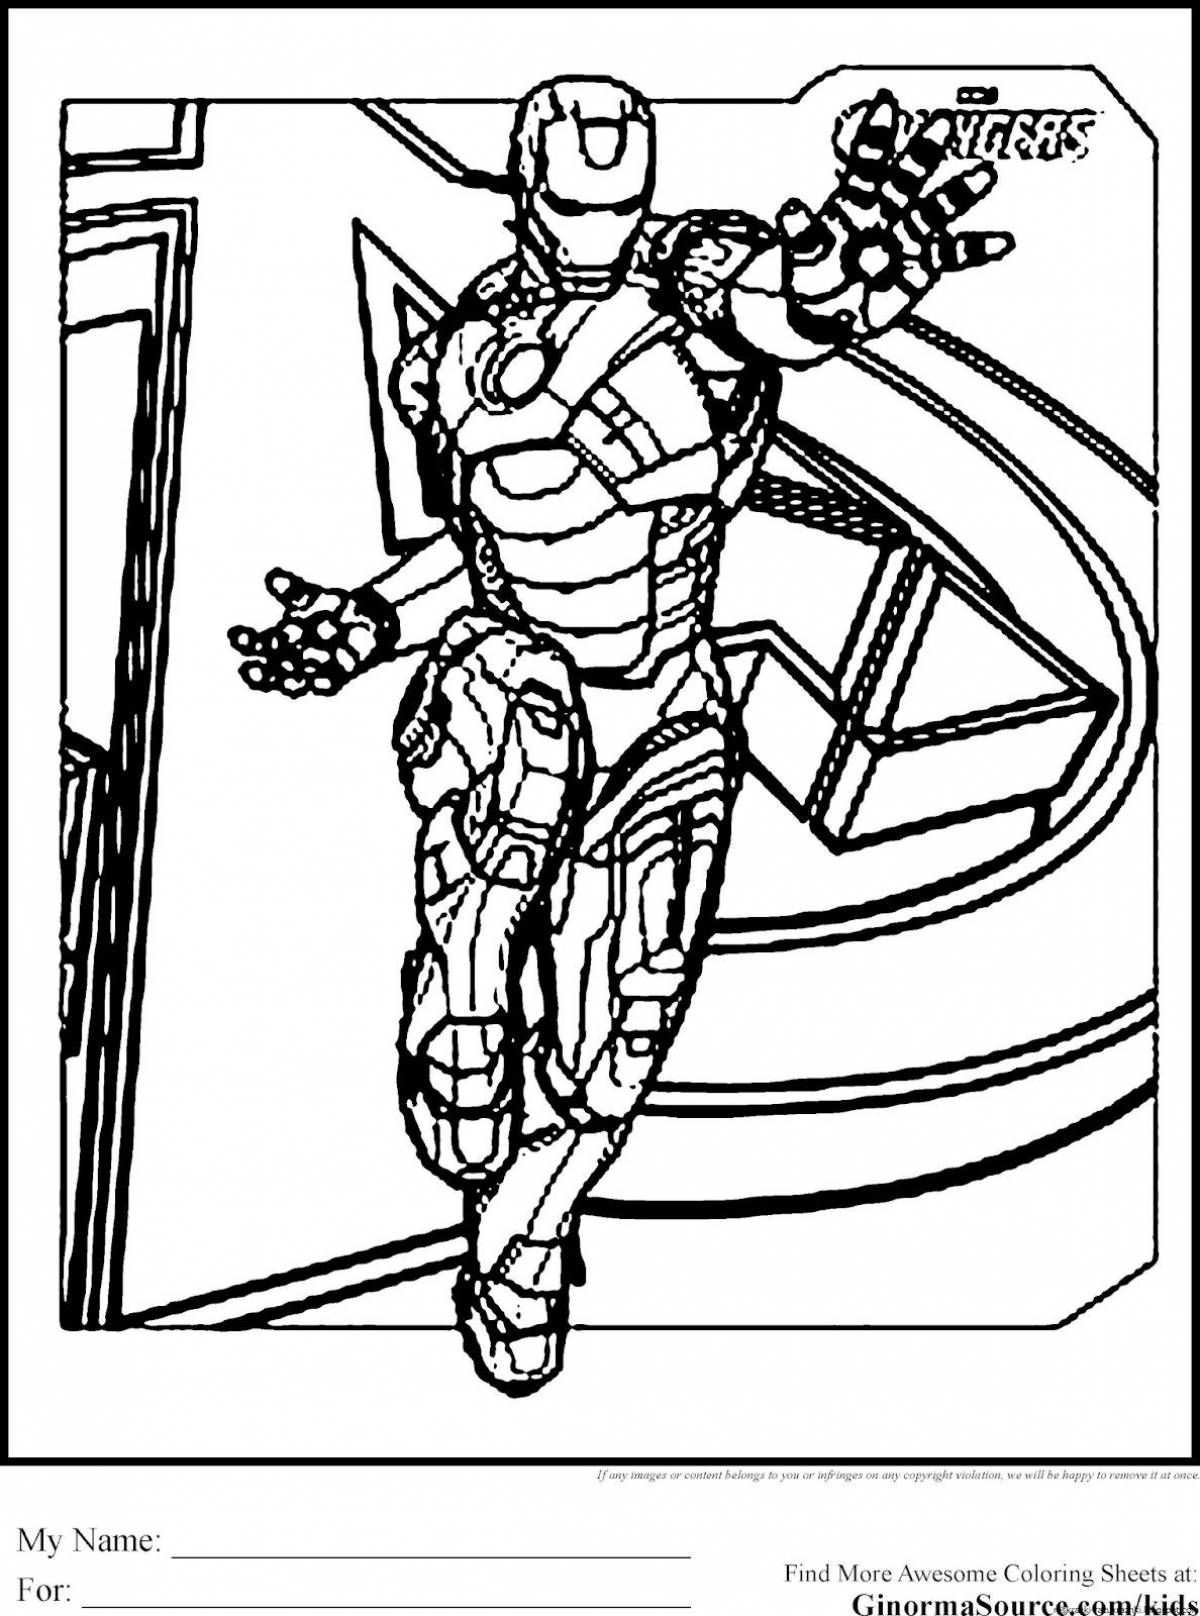 Awesome robox coloring page